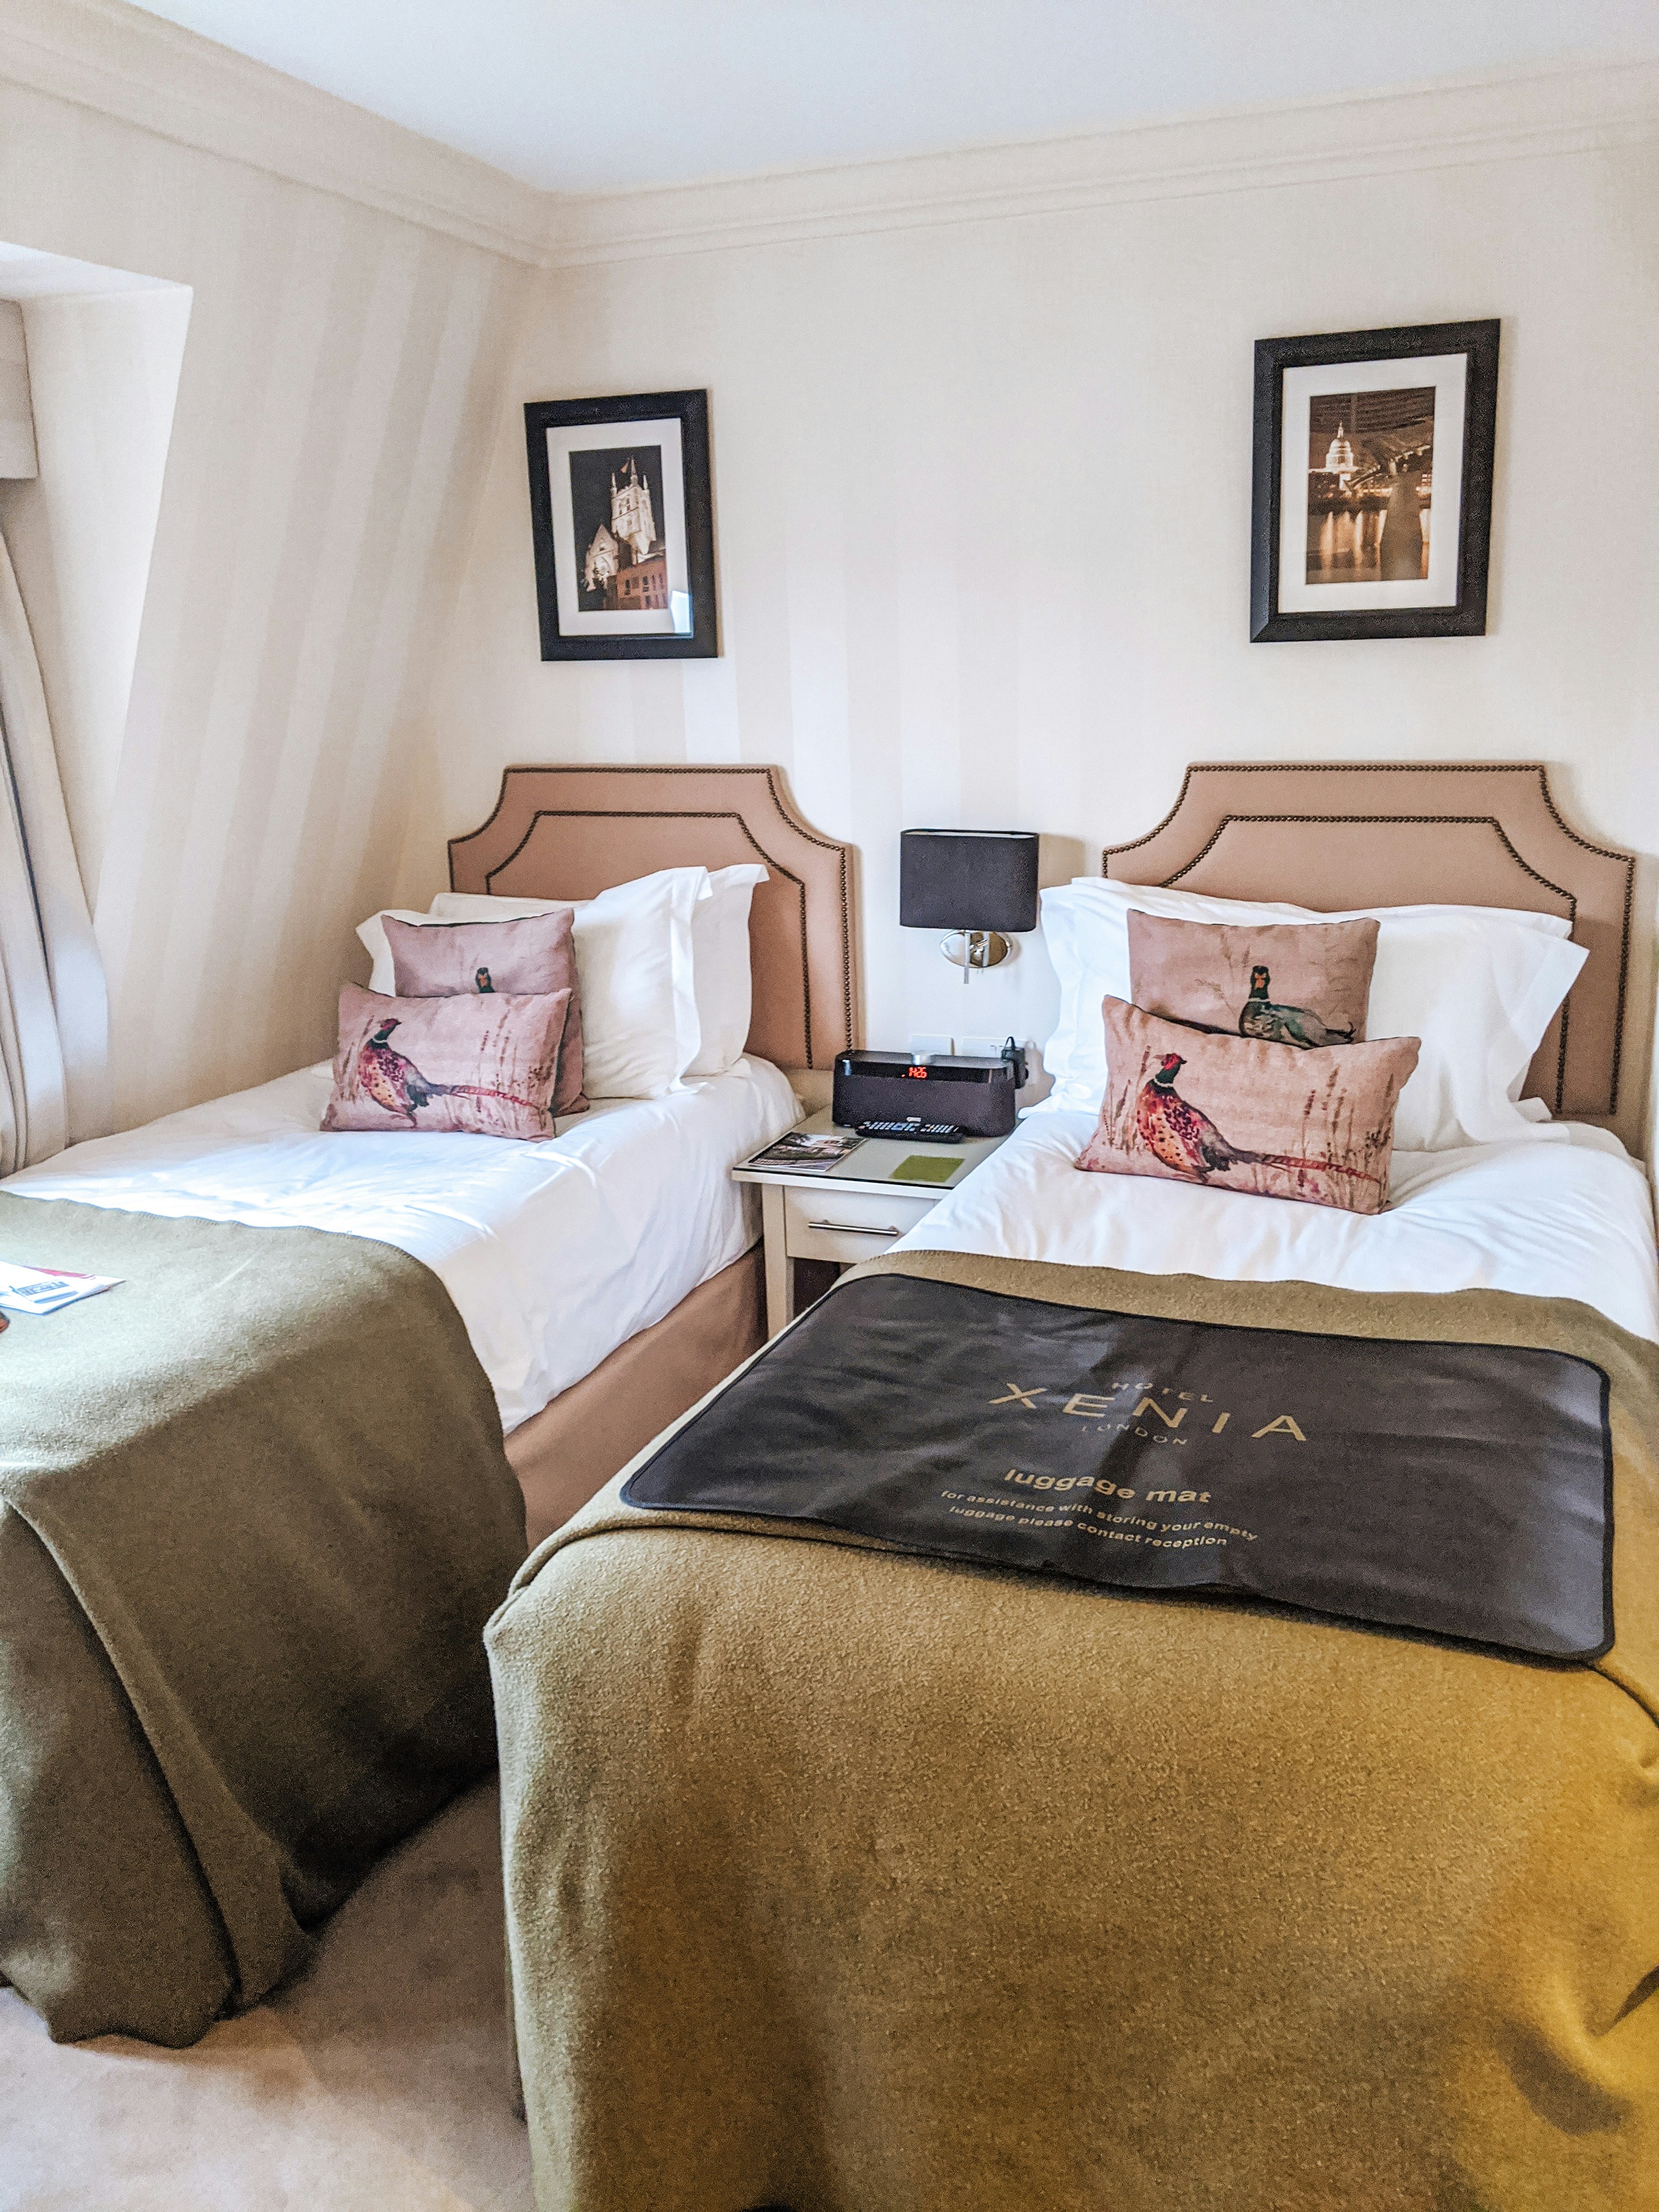 Hotel Xenia London: a chic boutique style hotel from Marriott: the deluxe twin room was cozy but charming with twin beds located in the mansard roof of a 19th Century townhouse